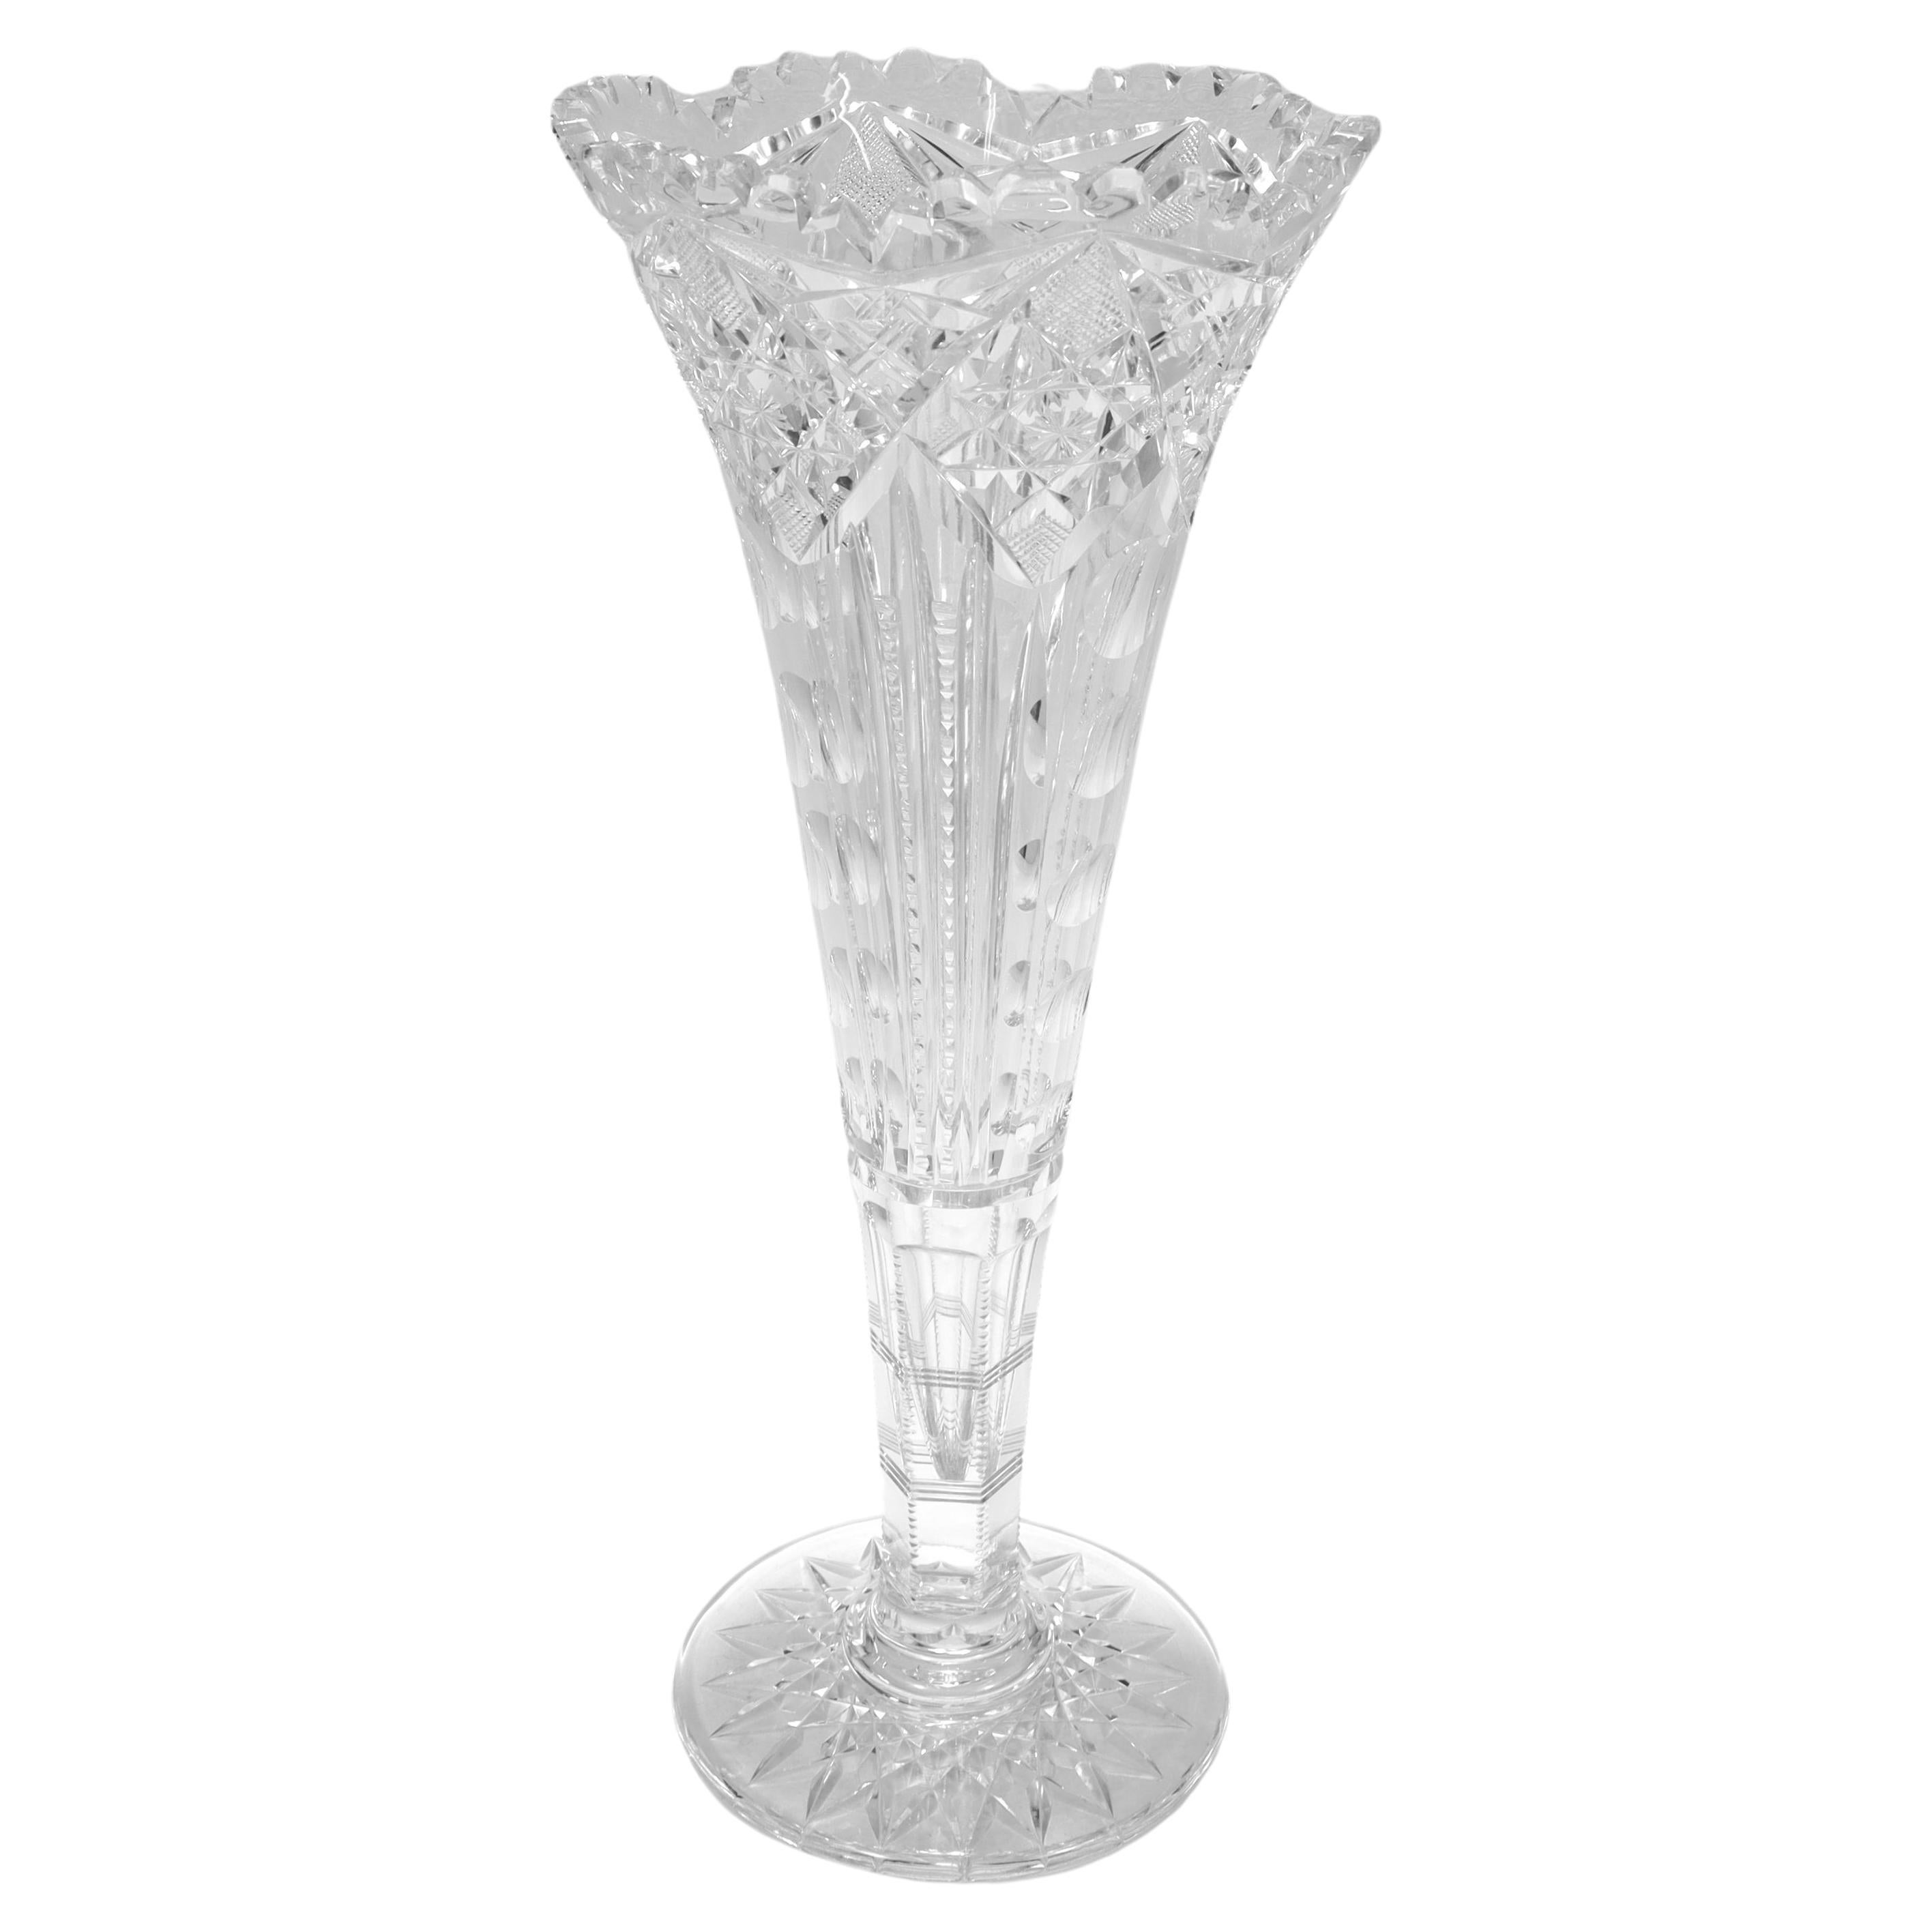 ABP American Brilliant Period by J. HOARE, New York Cut Crystal